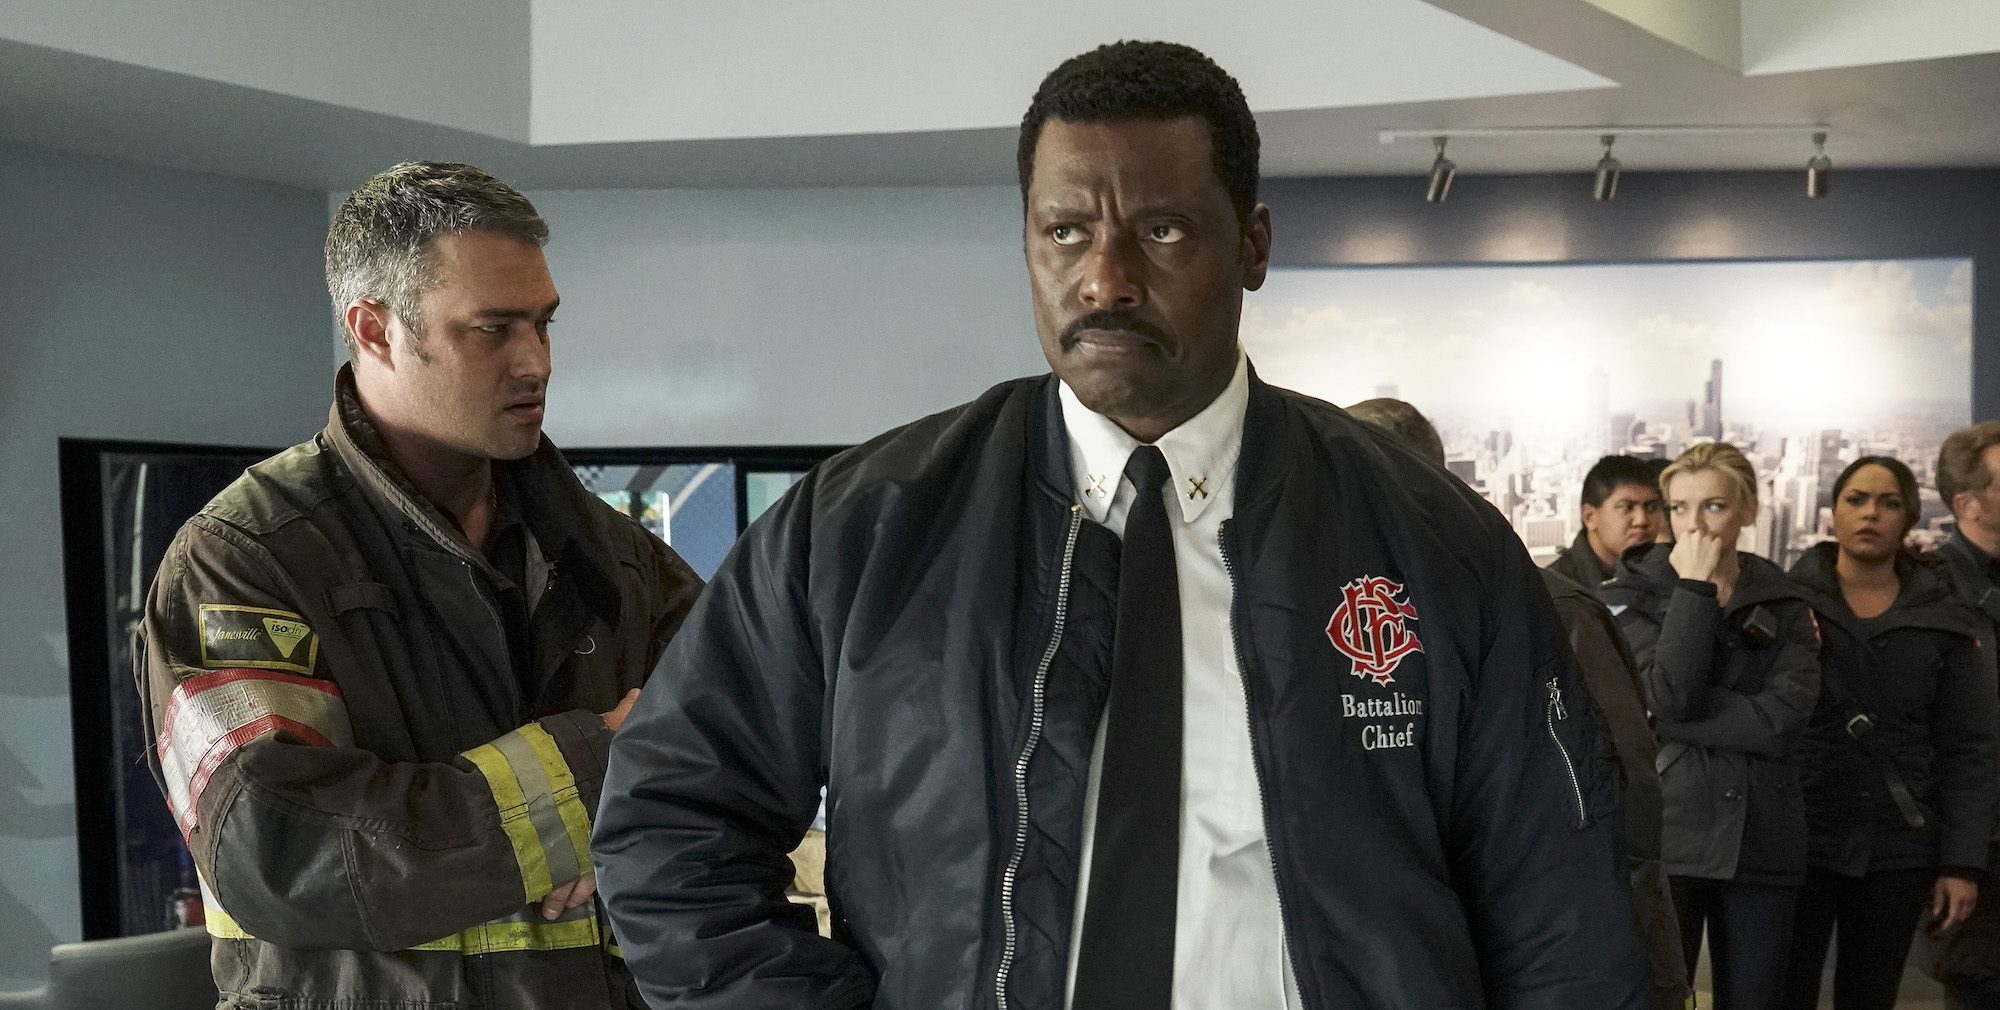 Chicago Fire Season 12 Starts Filming on November 27 in Chicago